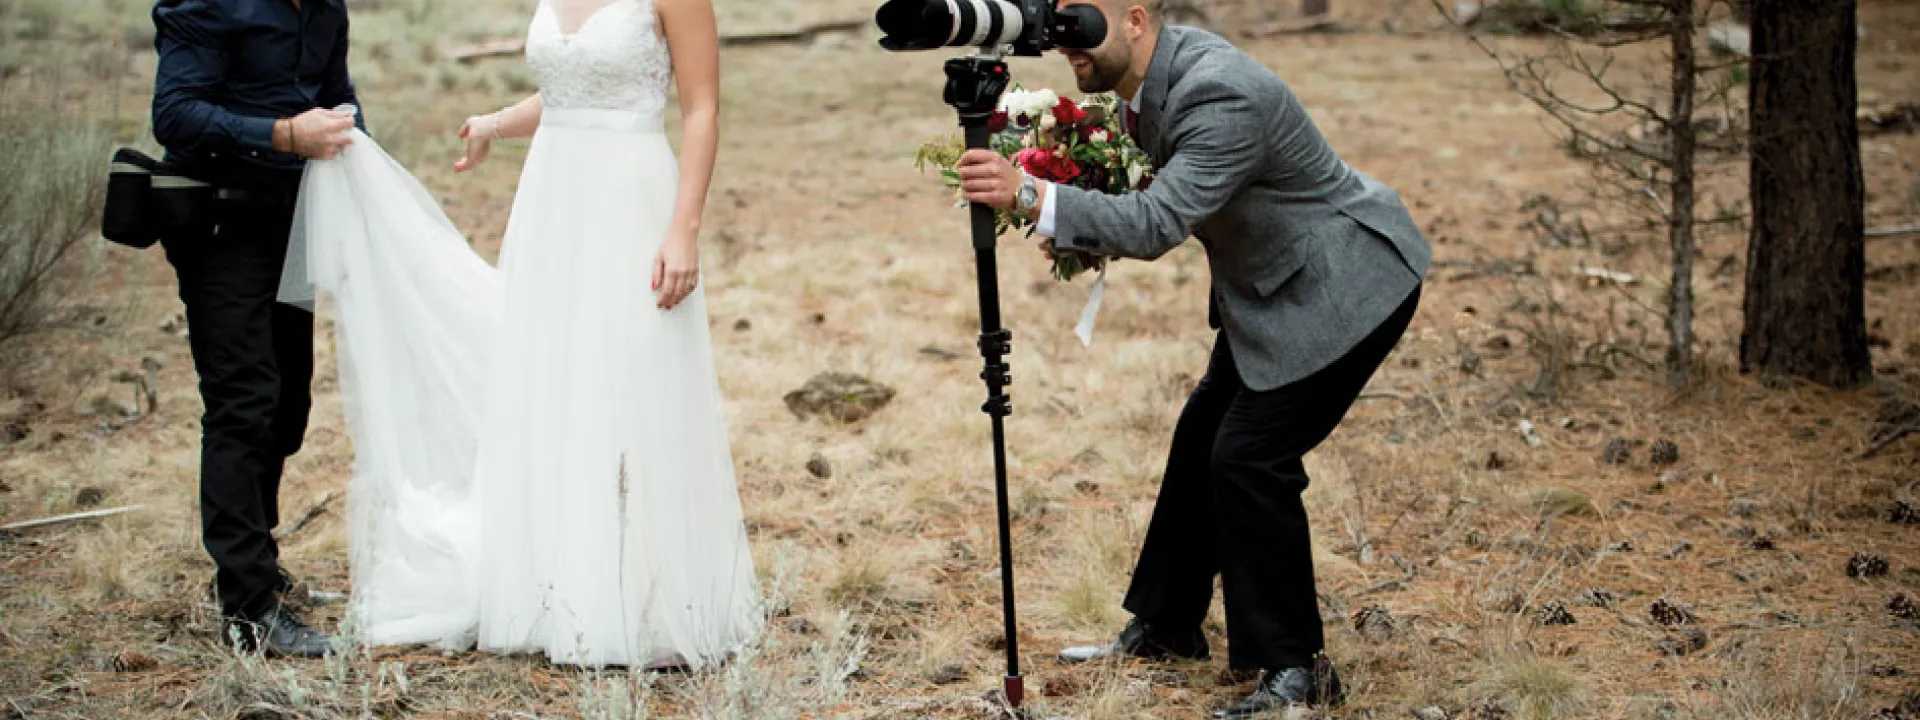 Get the wedding video of your dreams with tips from Oregon’s top videographers  